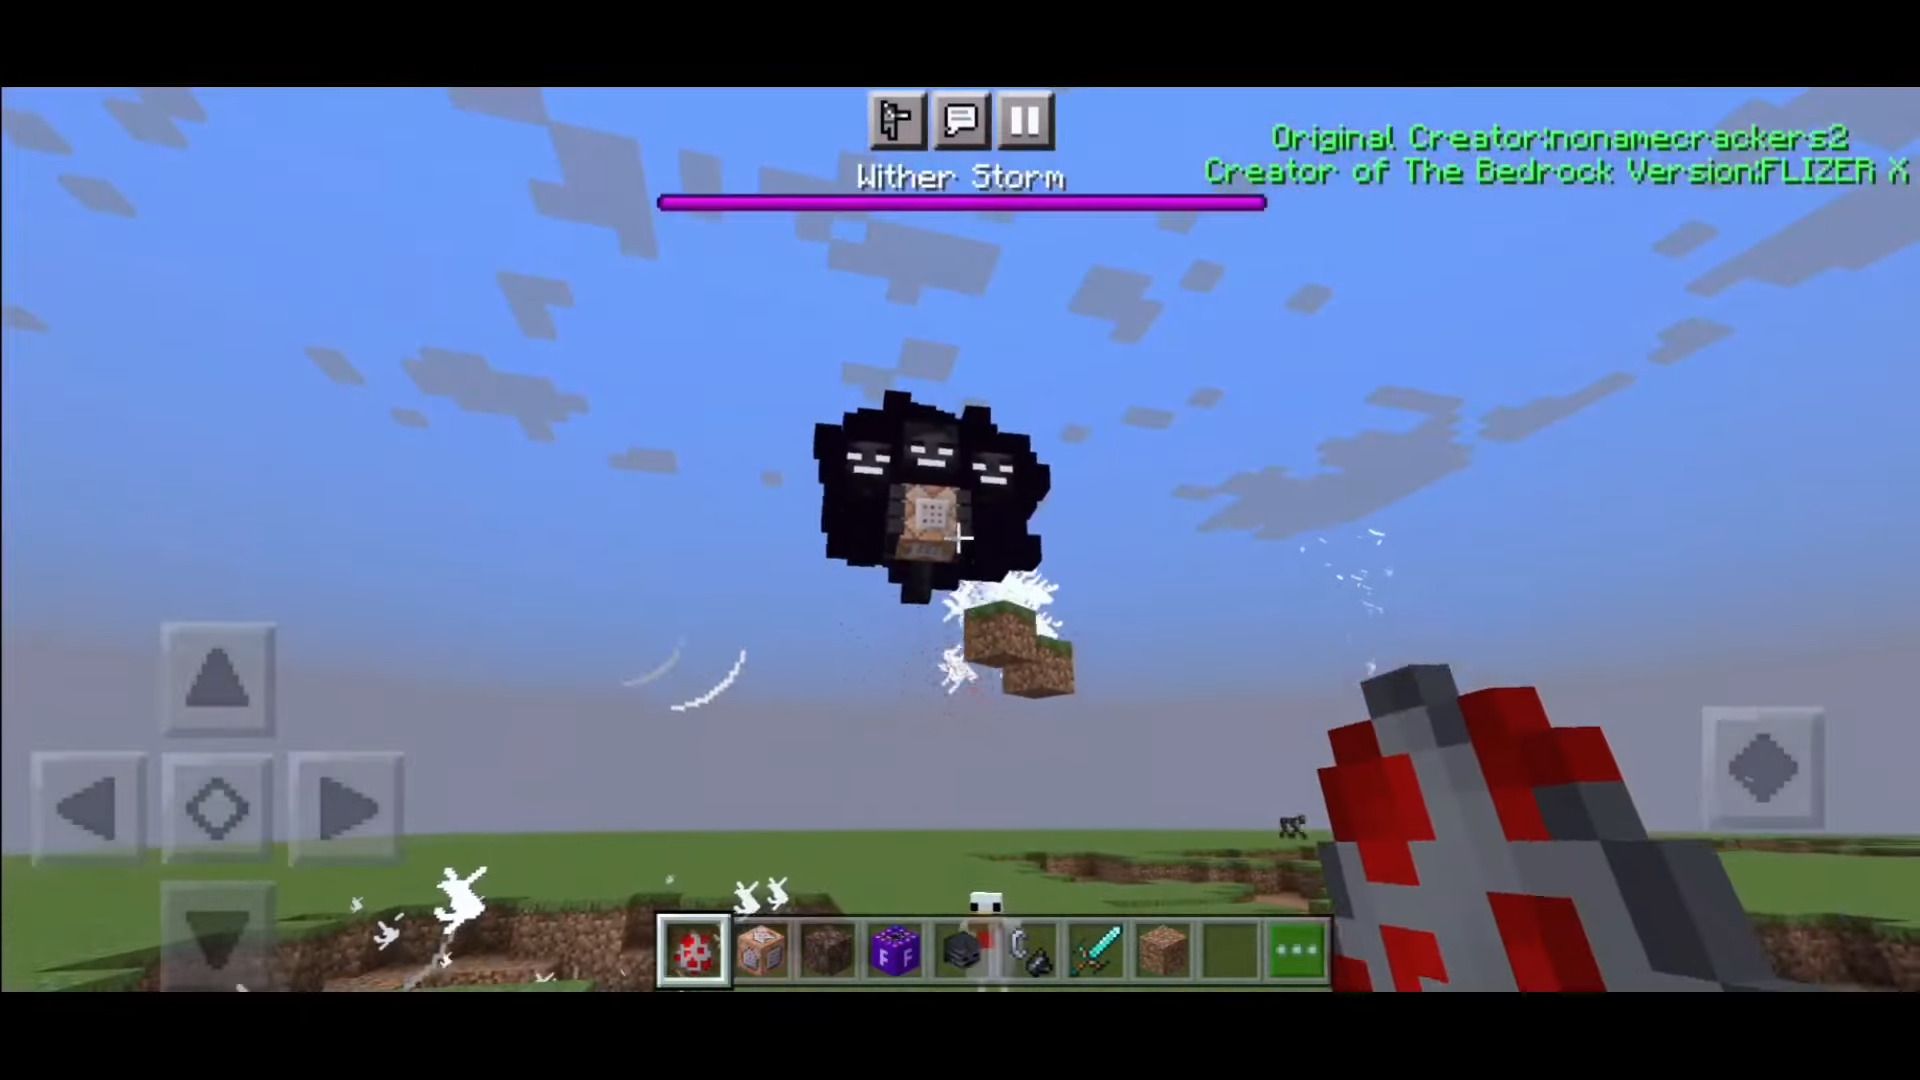 Wither Storm, Wiki